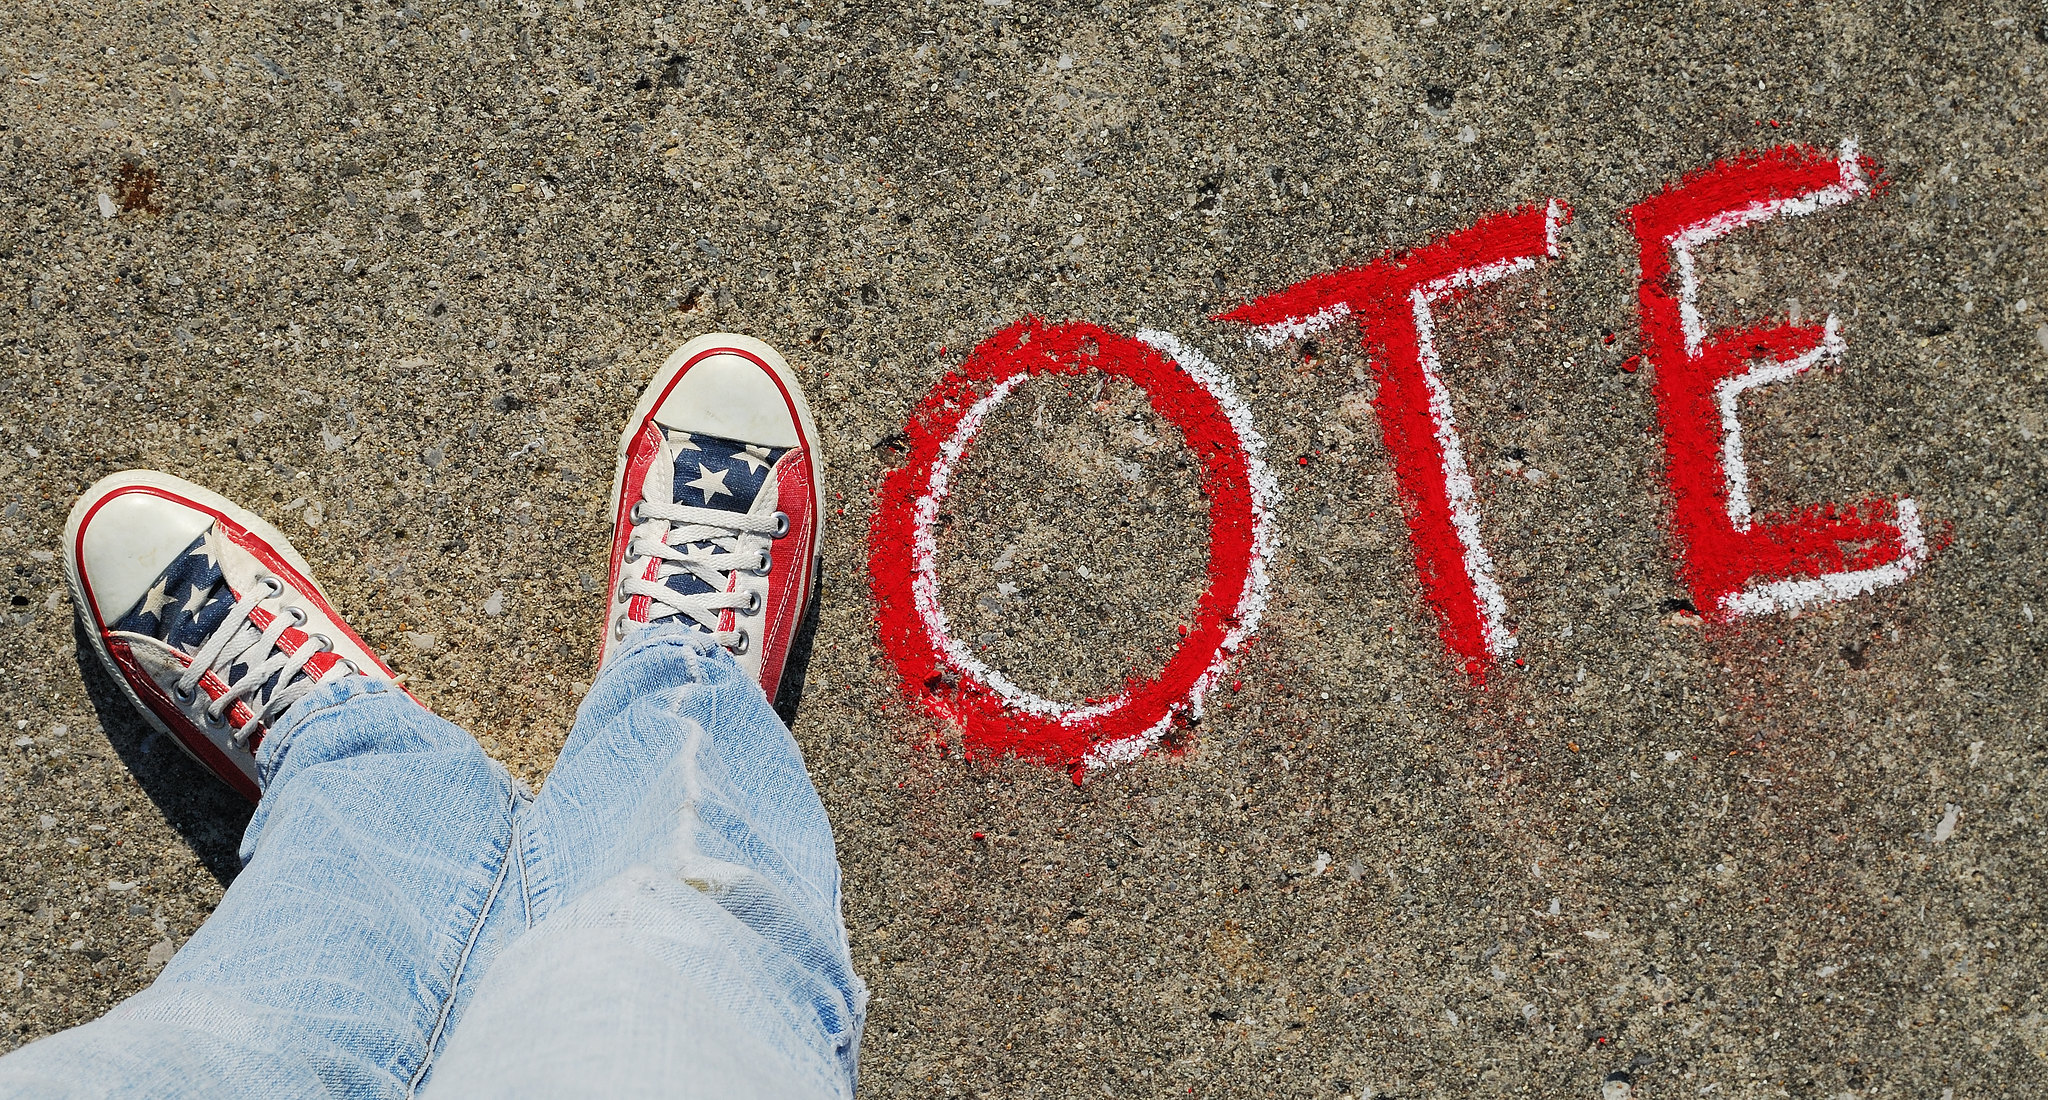 Photograph of two feet in red, white, and blue sneakers compose the letter "V," followed by "ote" in sidewalk chalk.